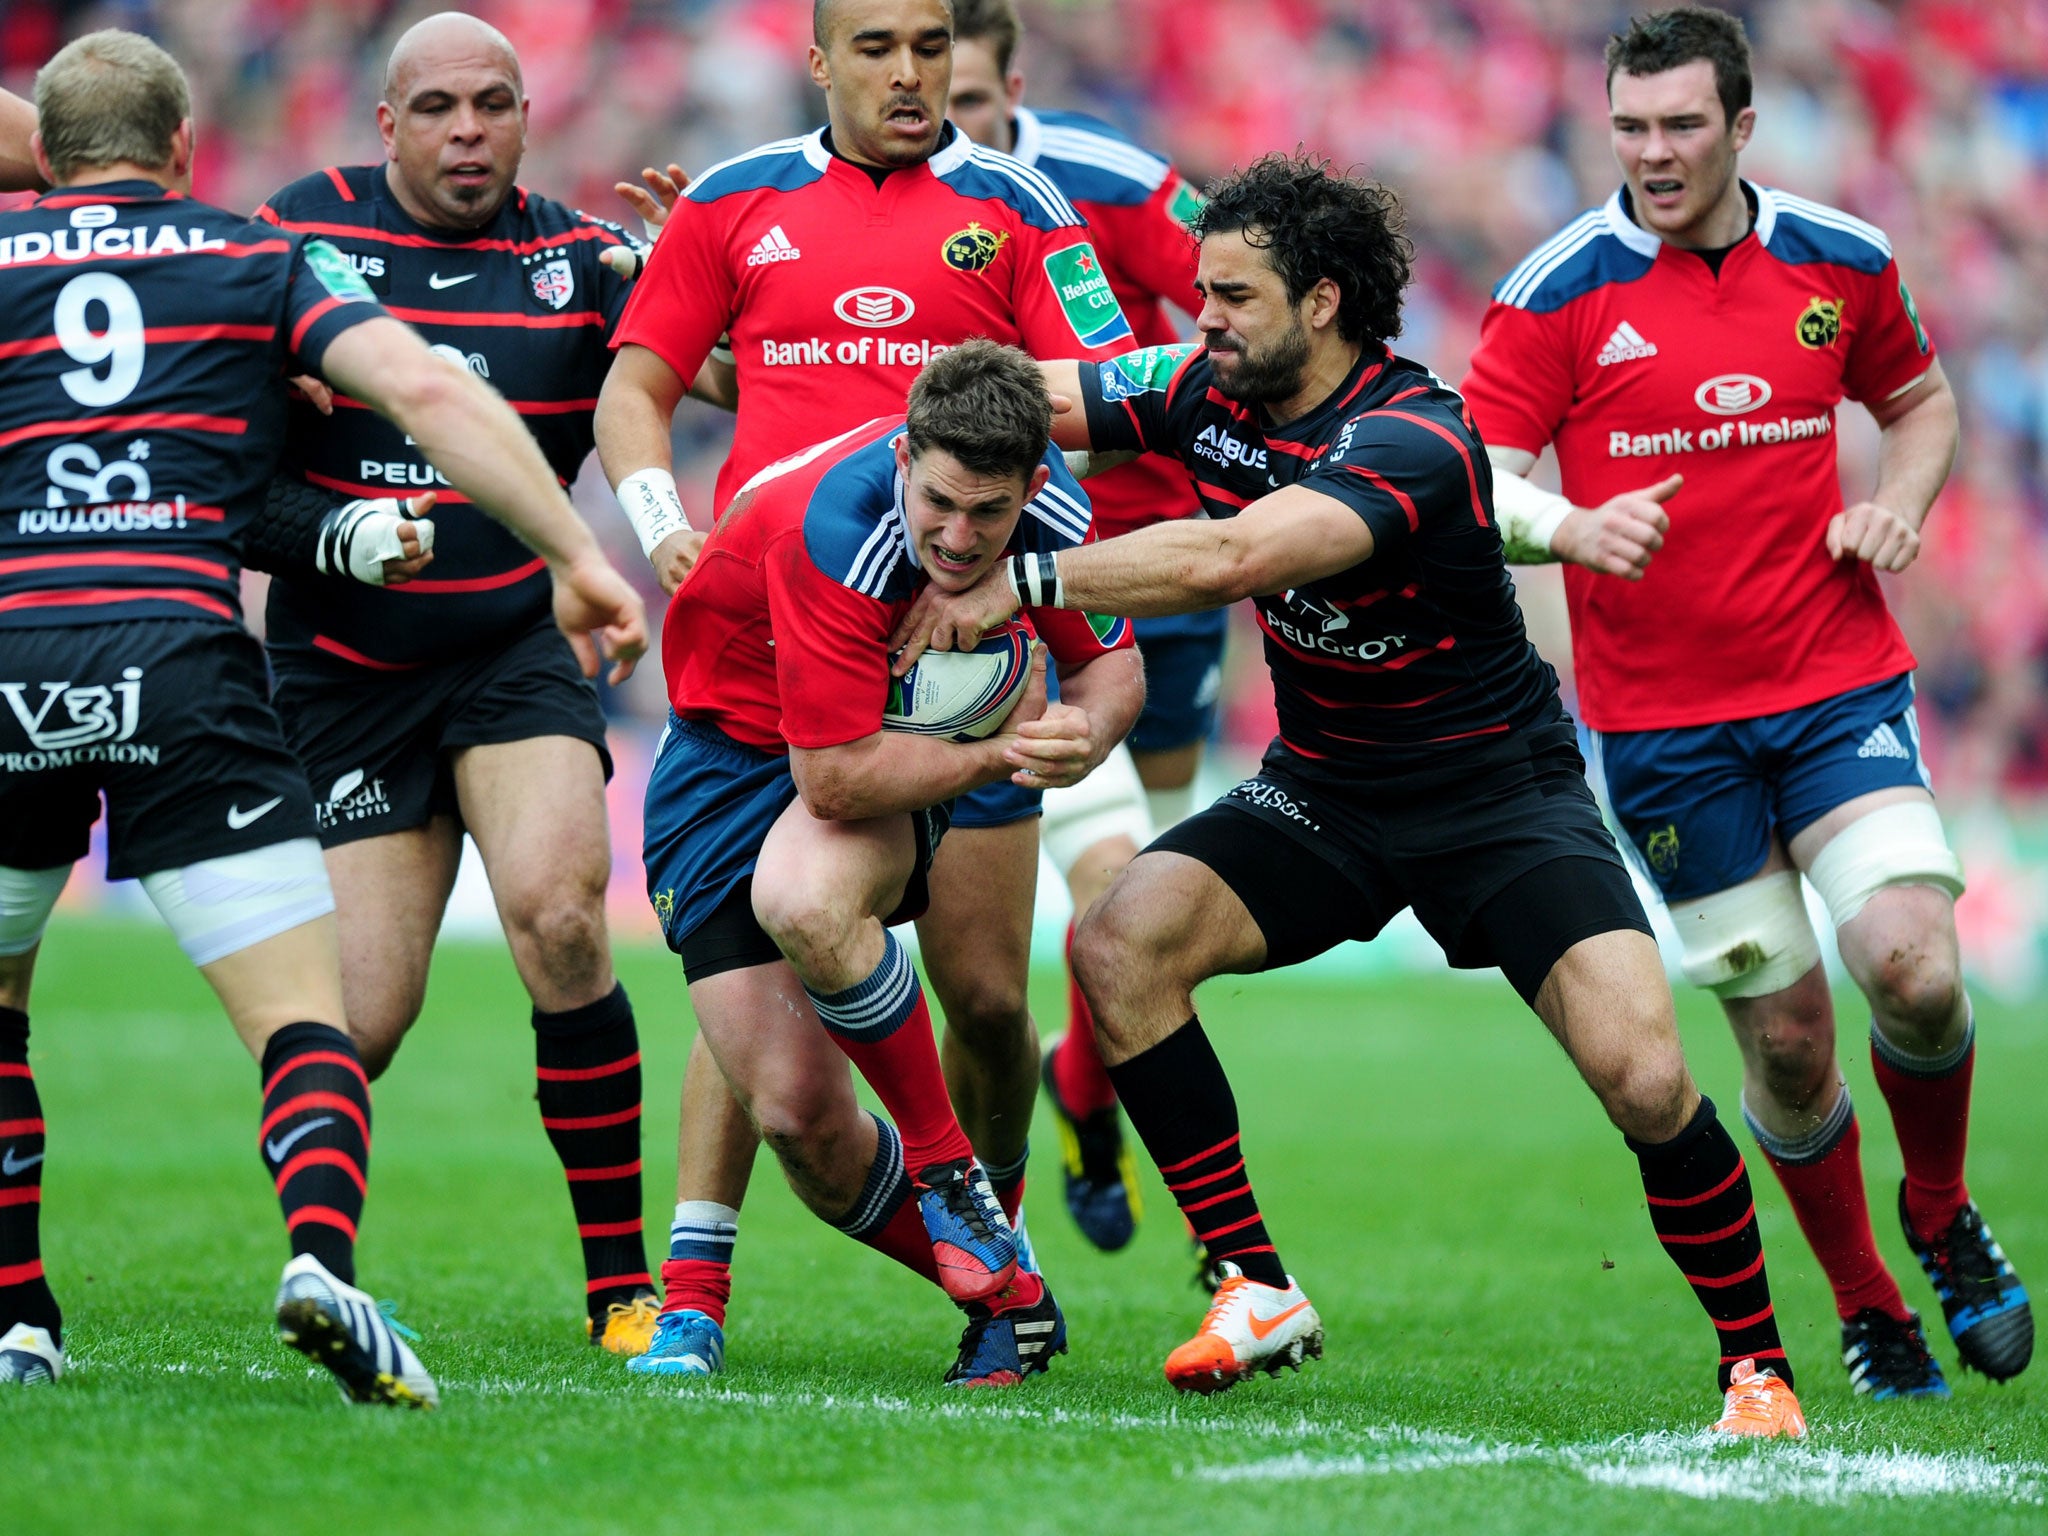 Ian Kealtey breaks through a tackle during Munster win